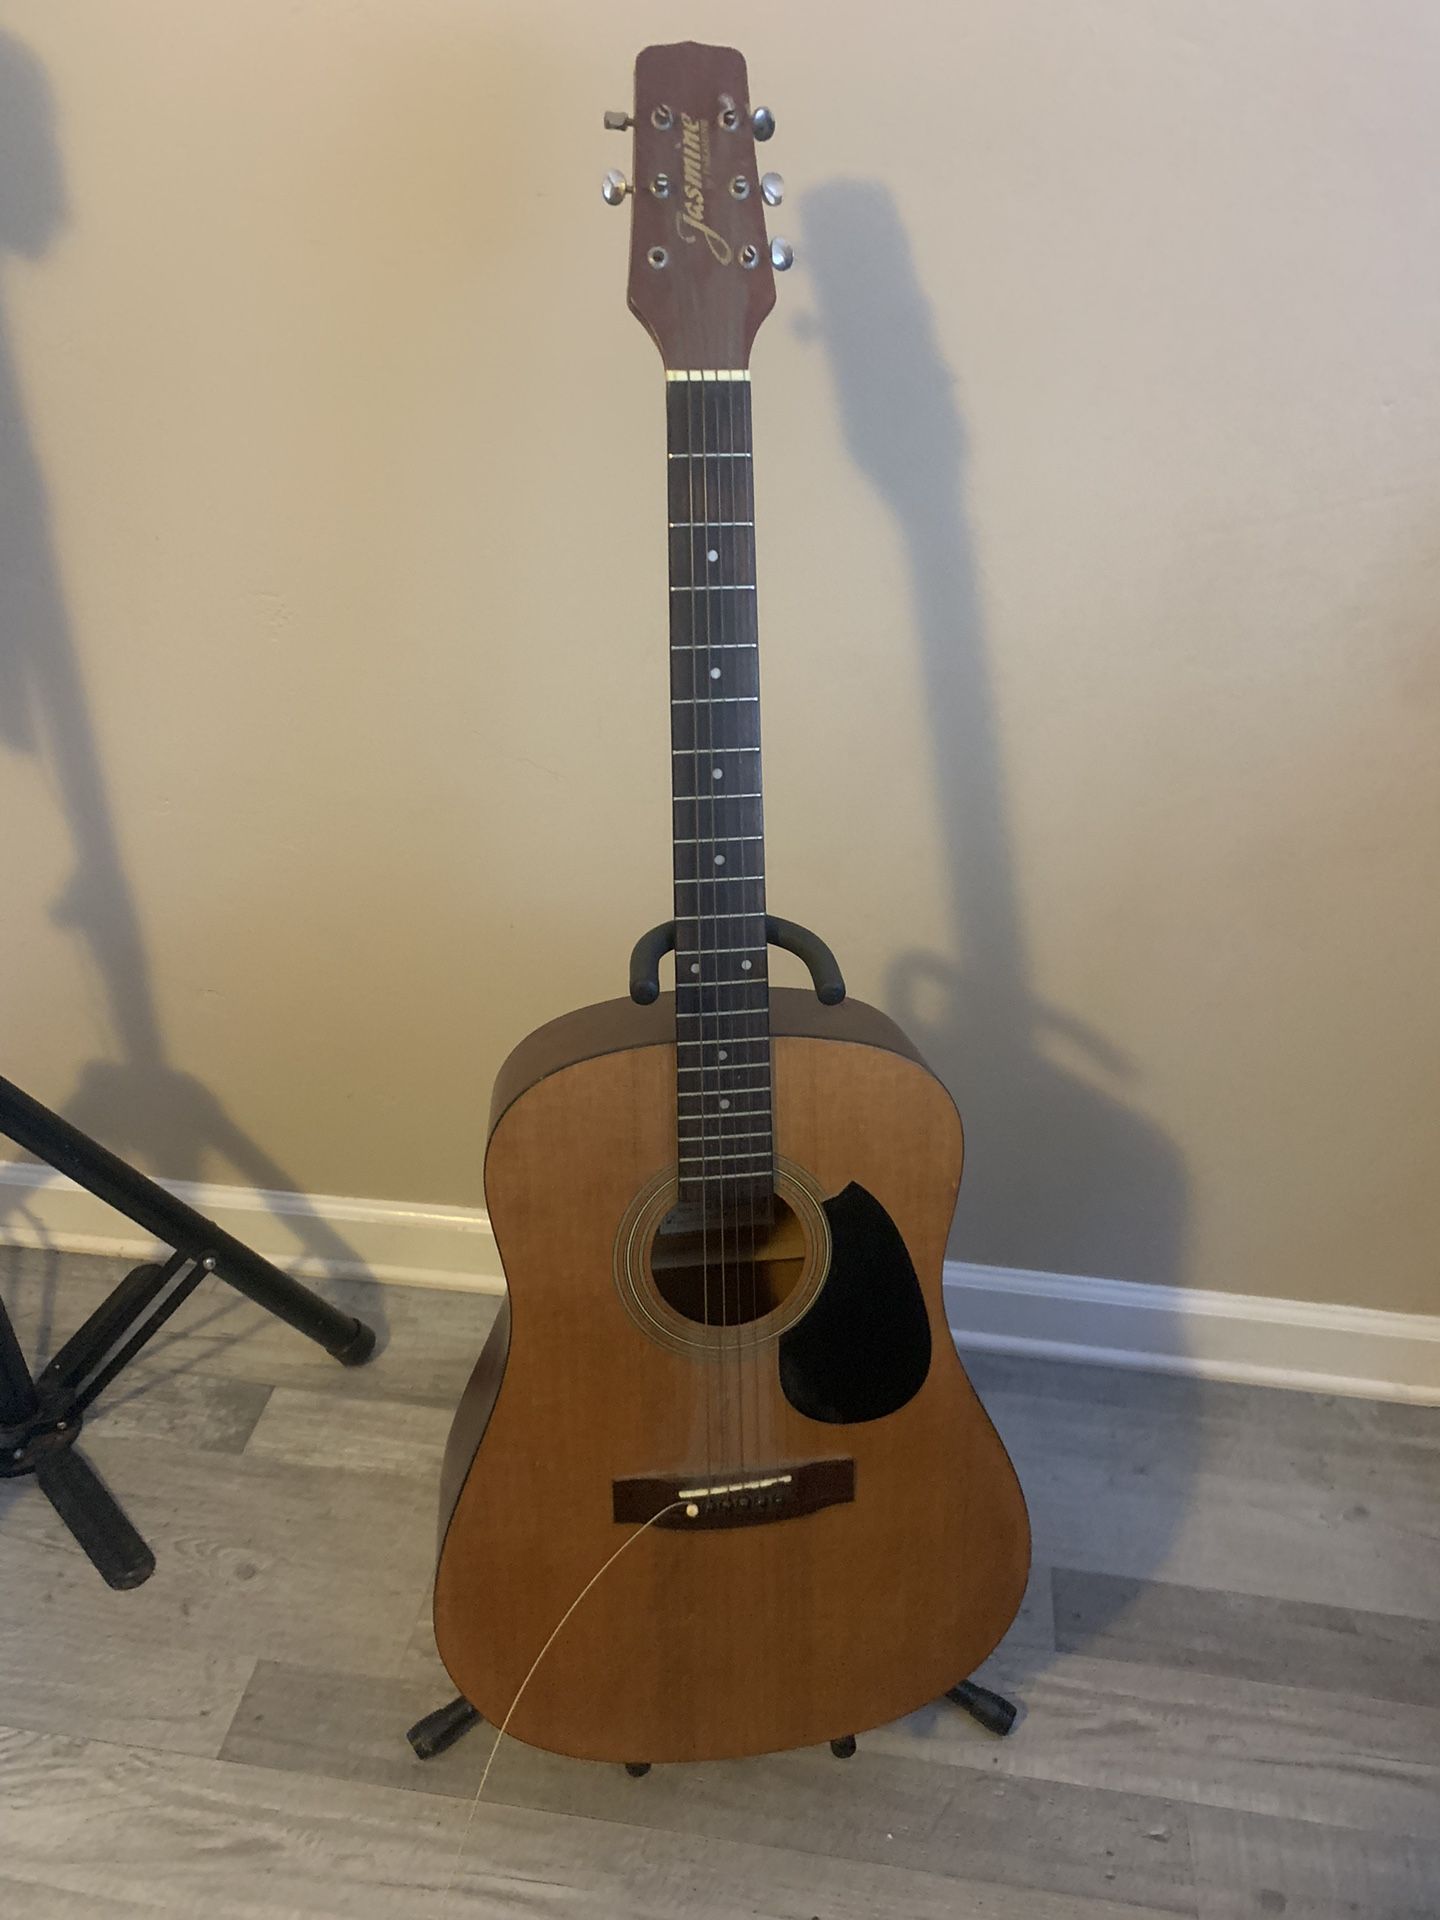 Guitar Missing Top Tuning Peg And String